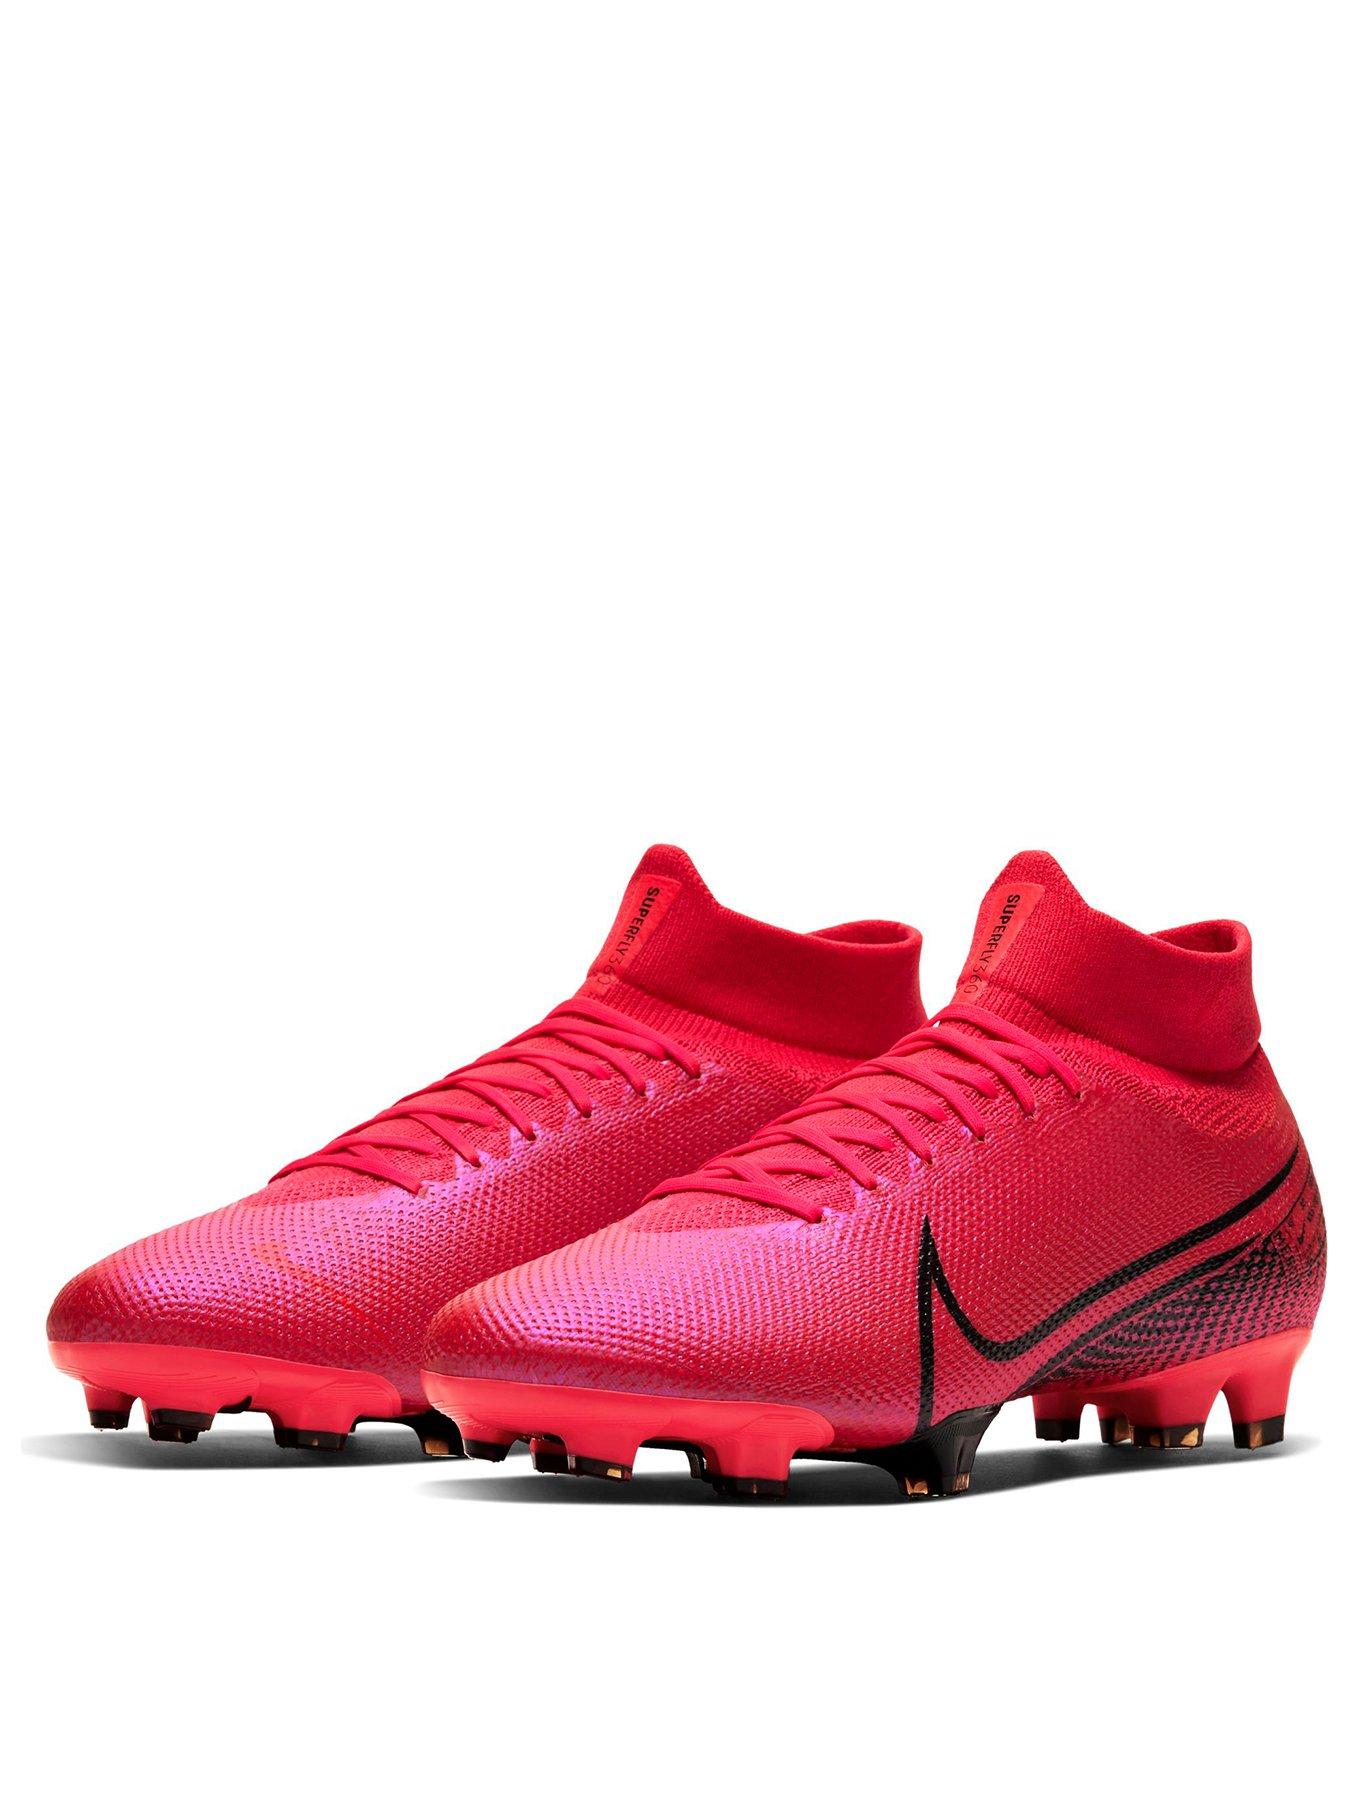 Boots Nike Mercurial Superfly 6 Elite AG PRO Game Over Ikko